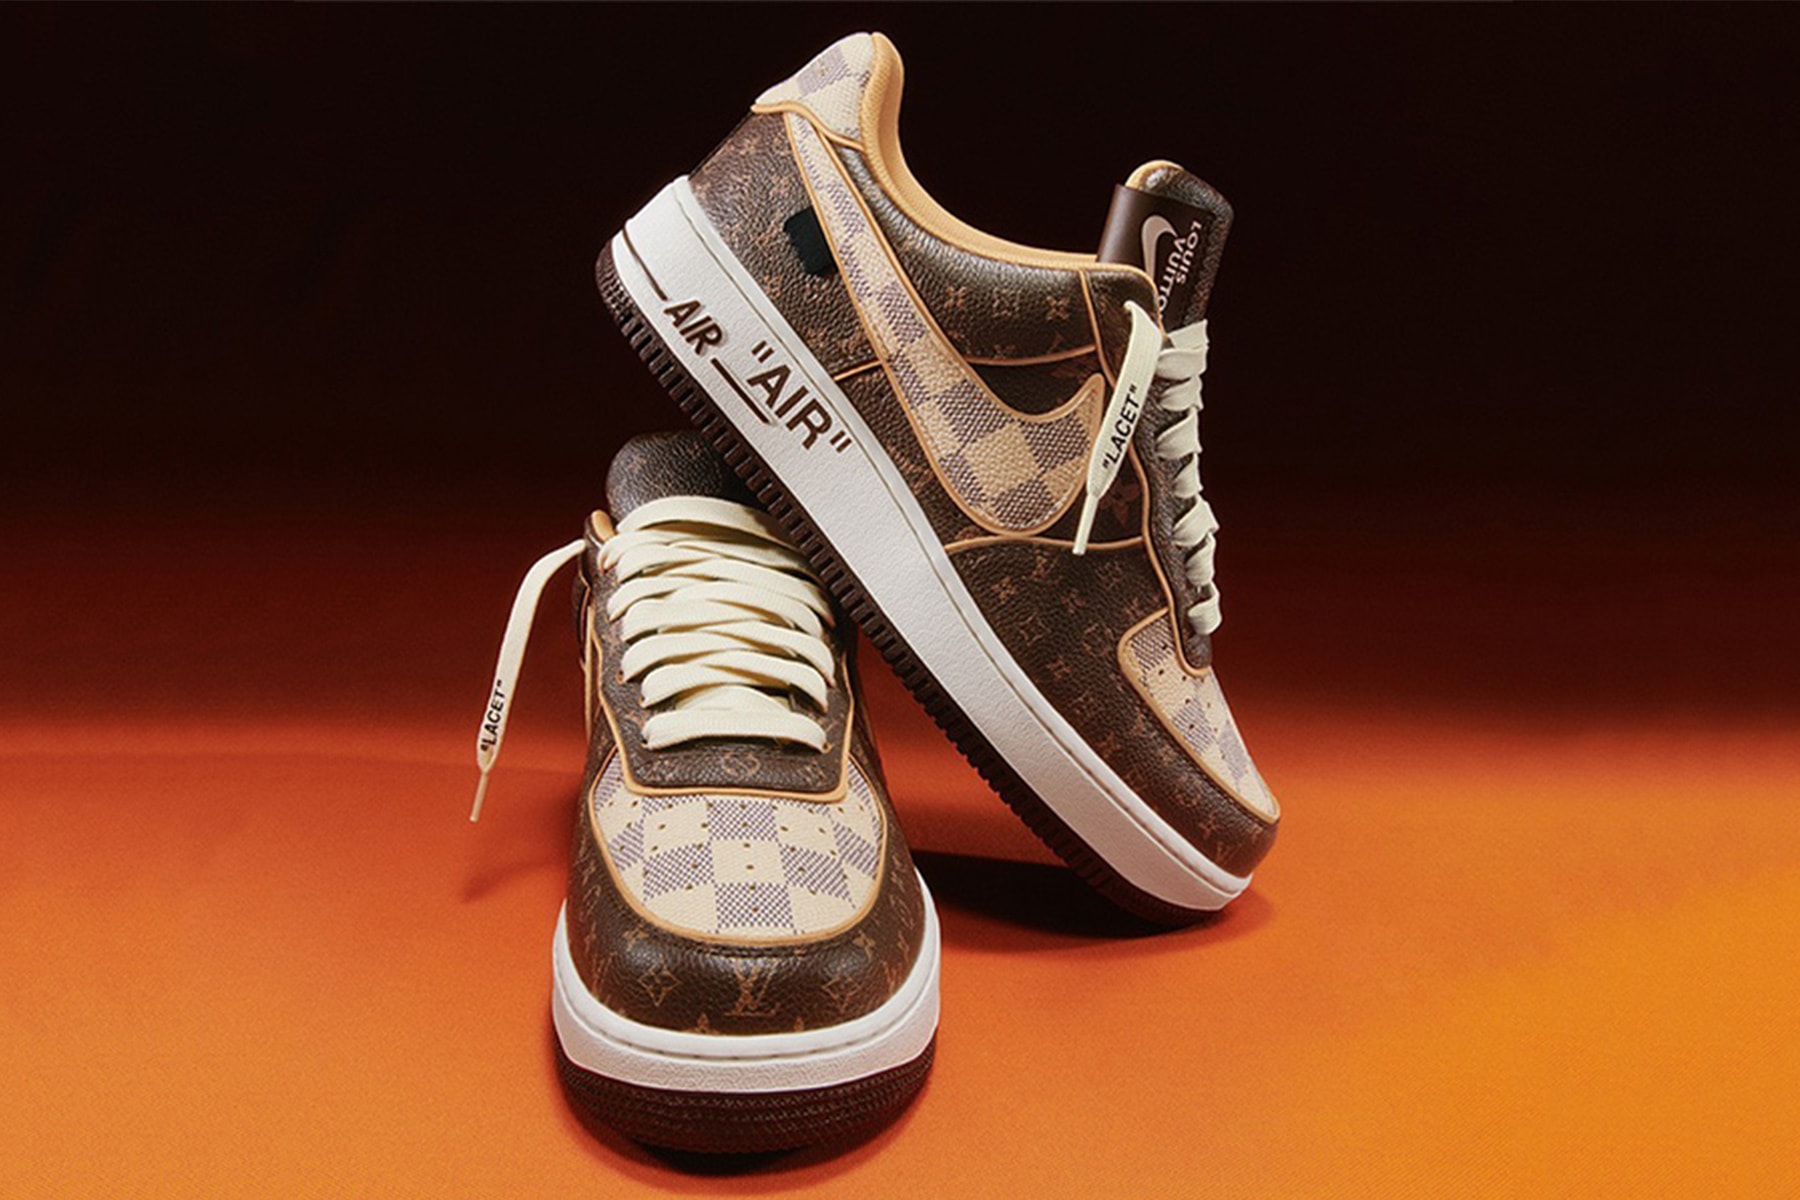 The Louis Vuitton and Nike “Air Force 1" by Virgil Abloh 競標價達到 $9 萬美元